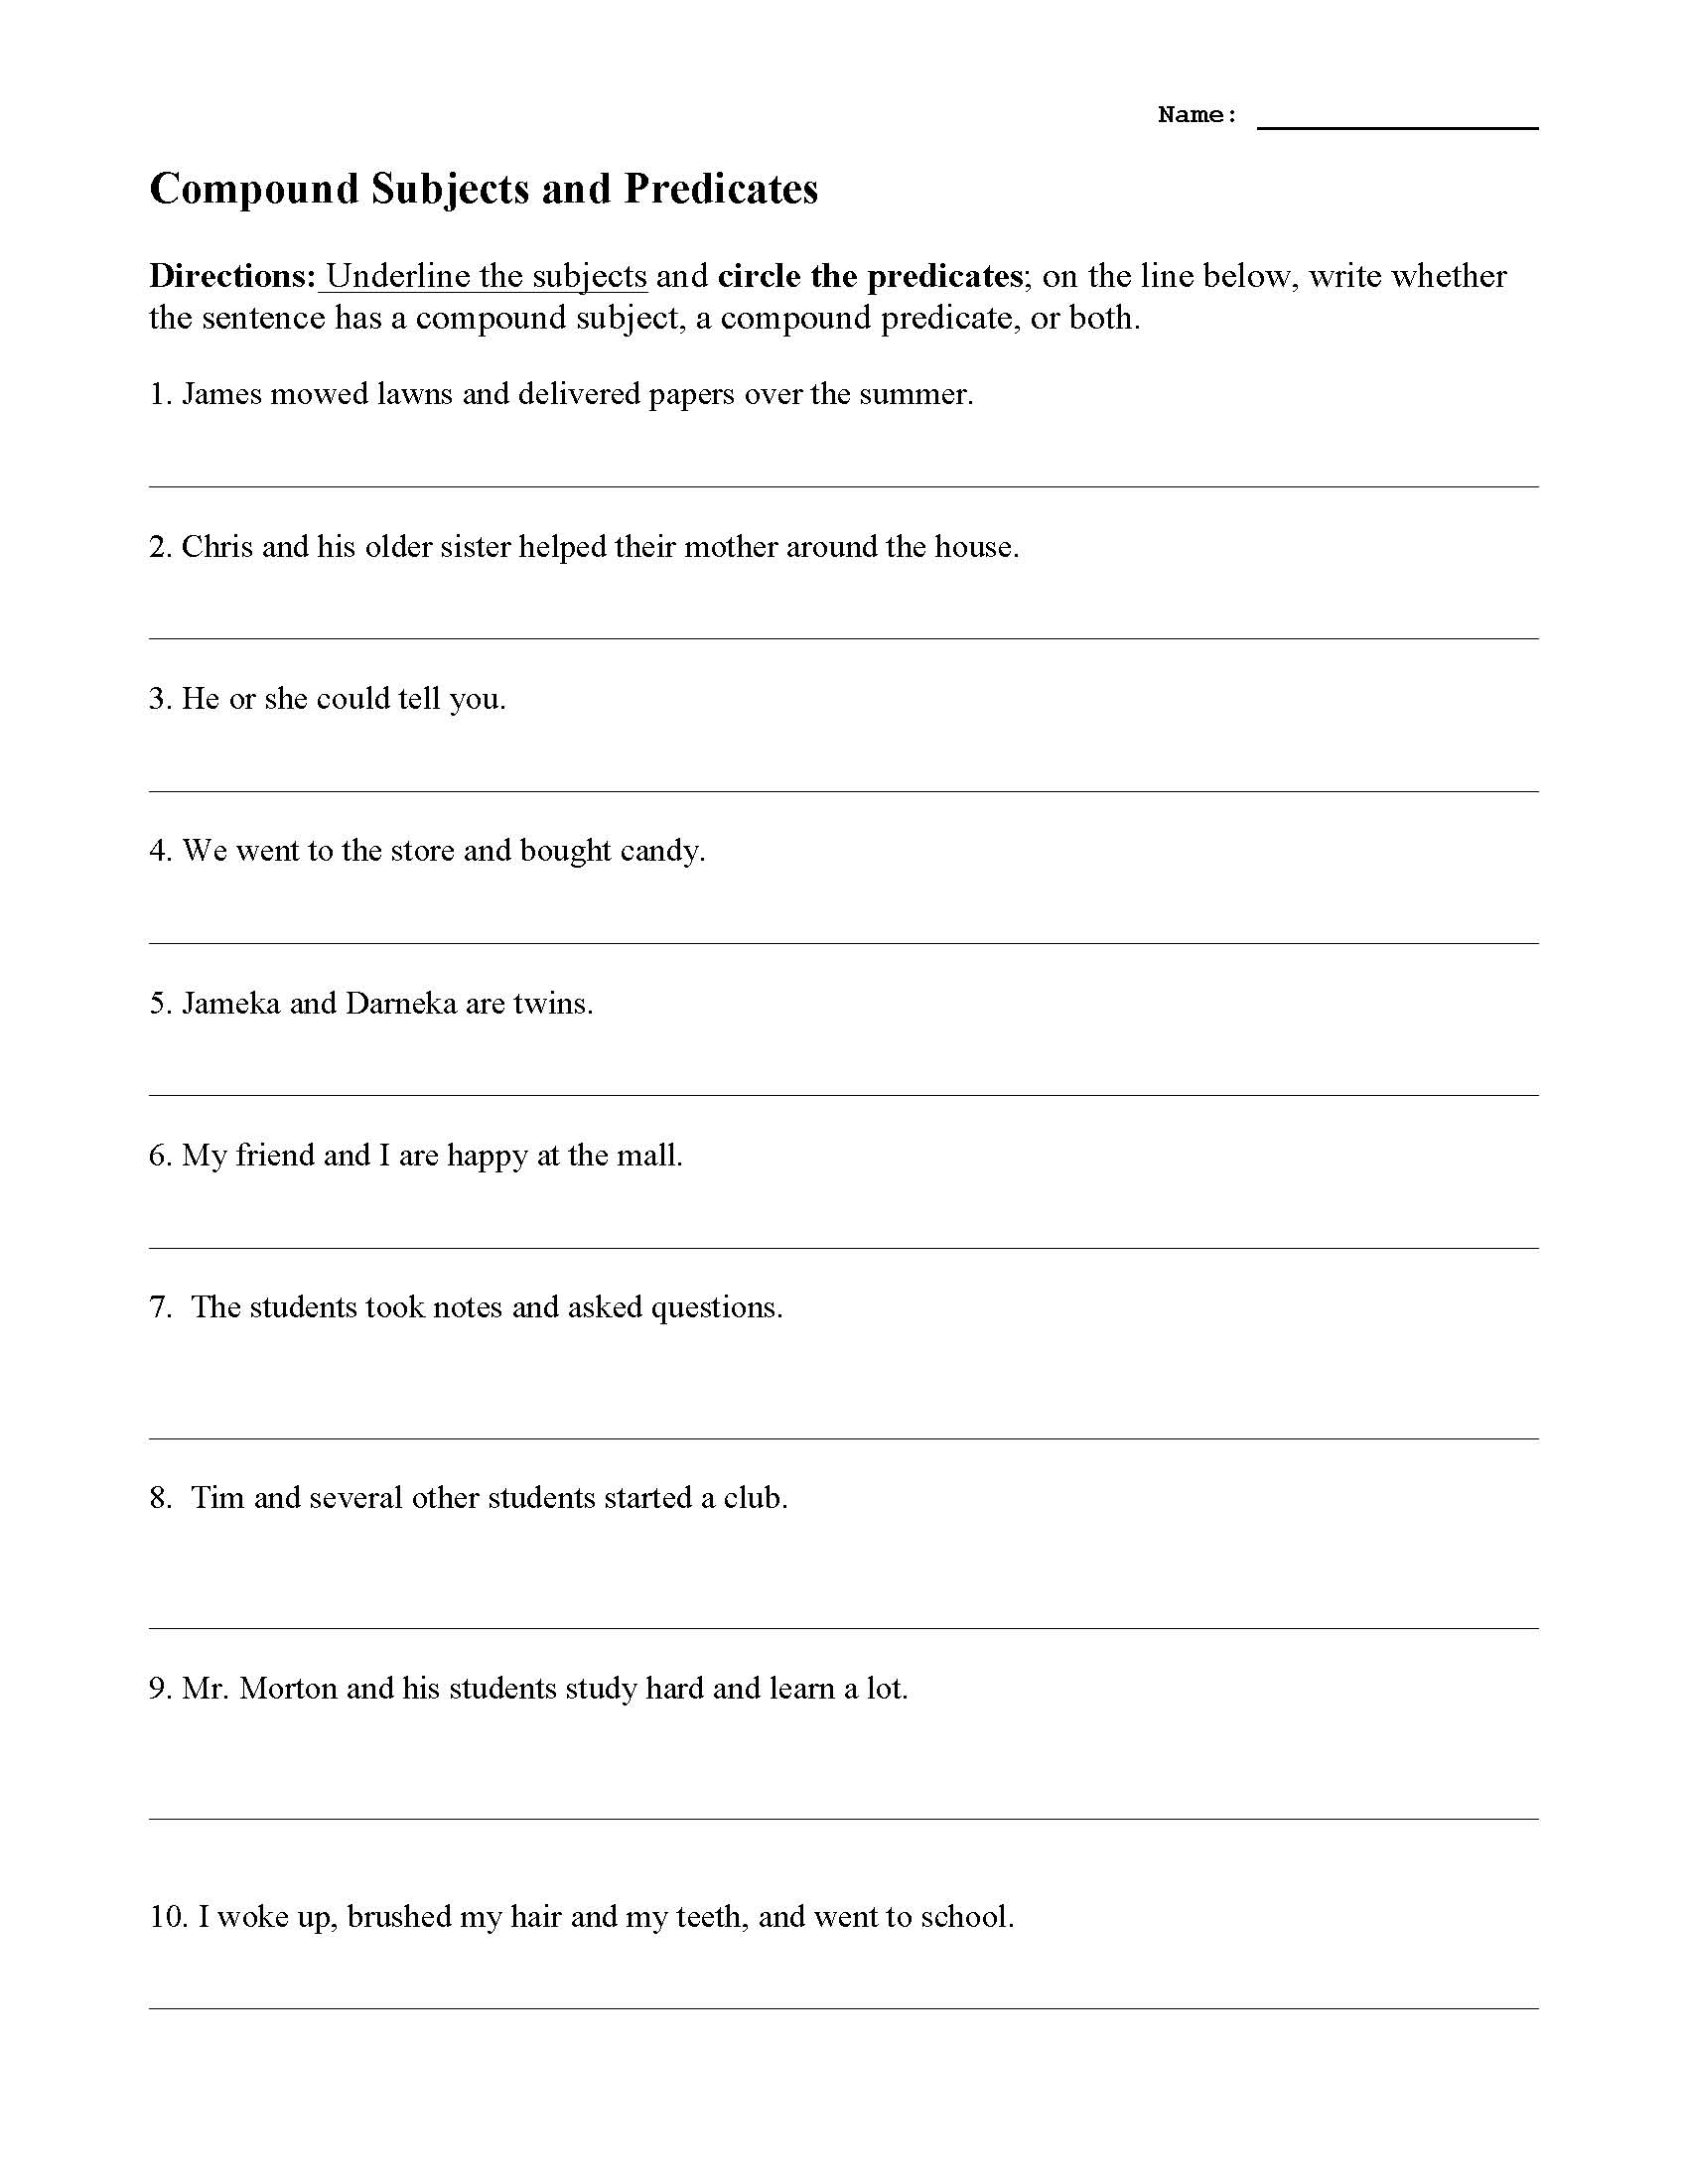 complete-subject-and-predicate-worksheet